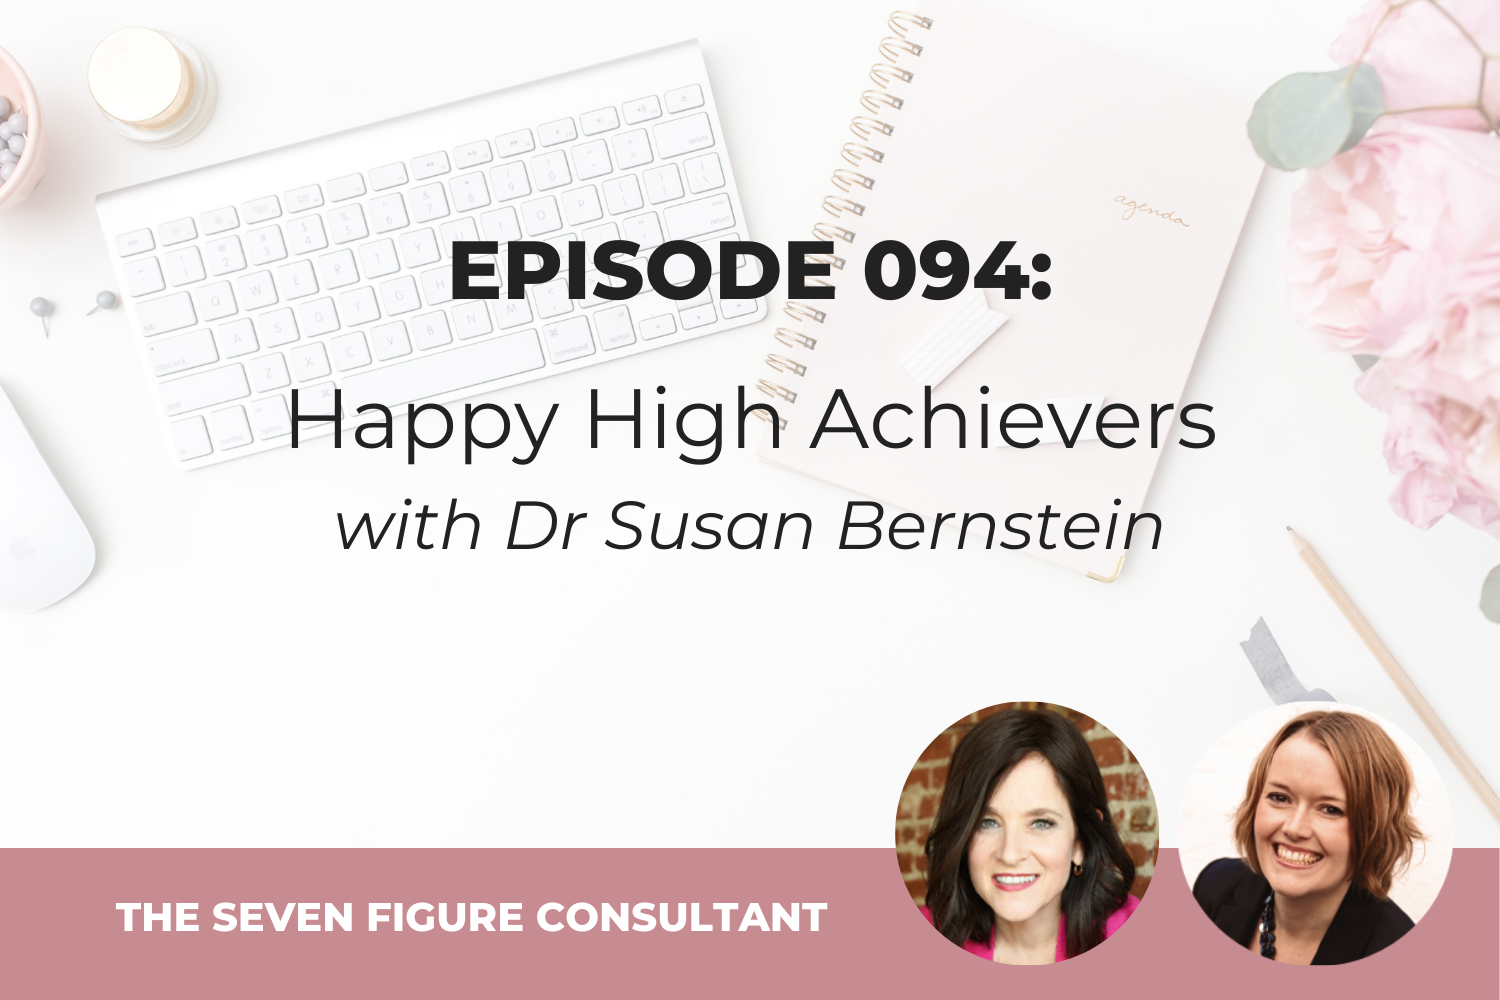 You are currently viewing Episode 094: Happy High Achievers with Dr Susan Bernstein